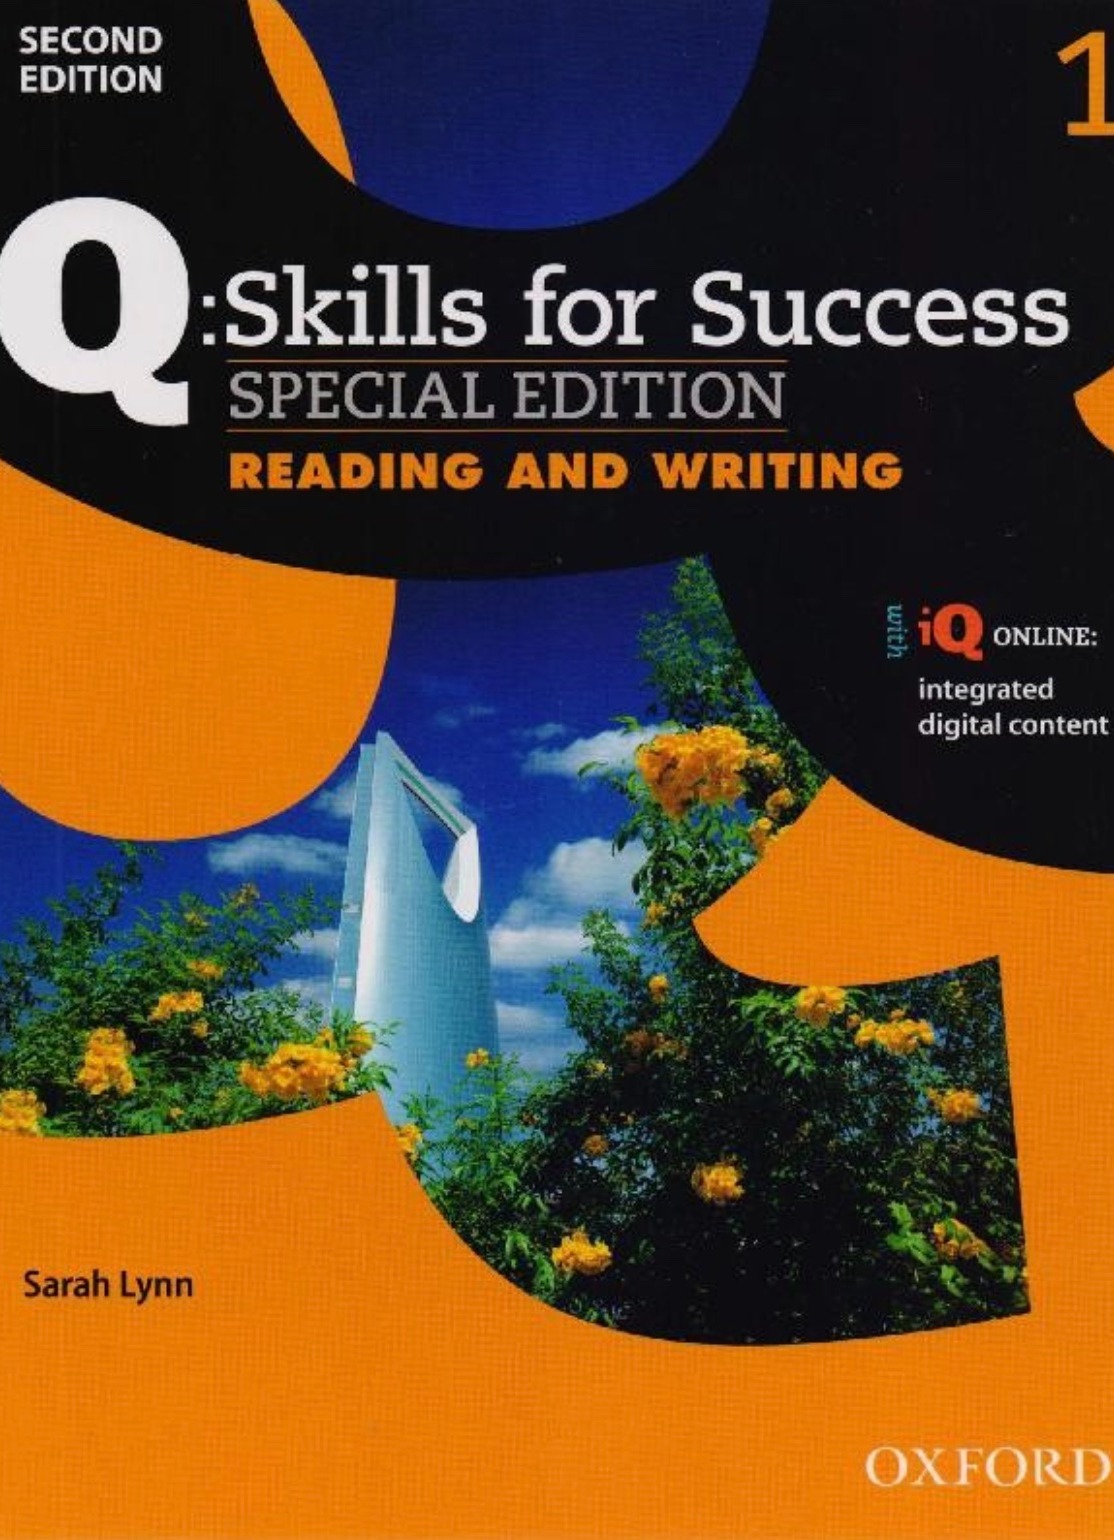 Q: Skills for Success Second Edition Special Edition Reading and